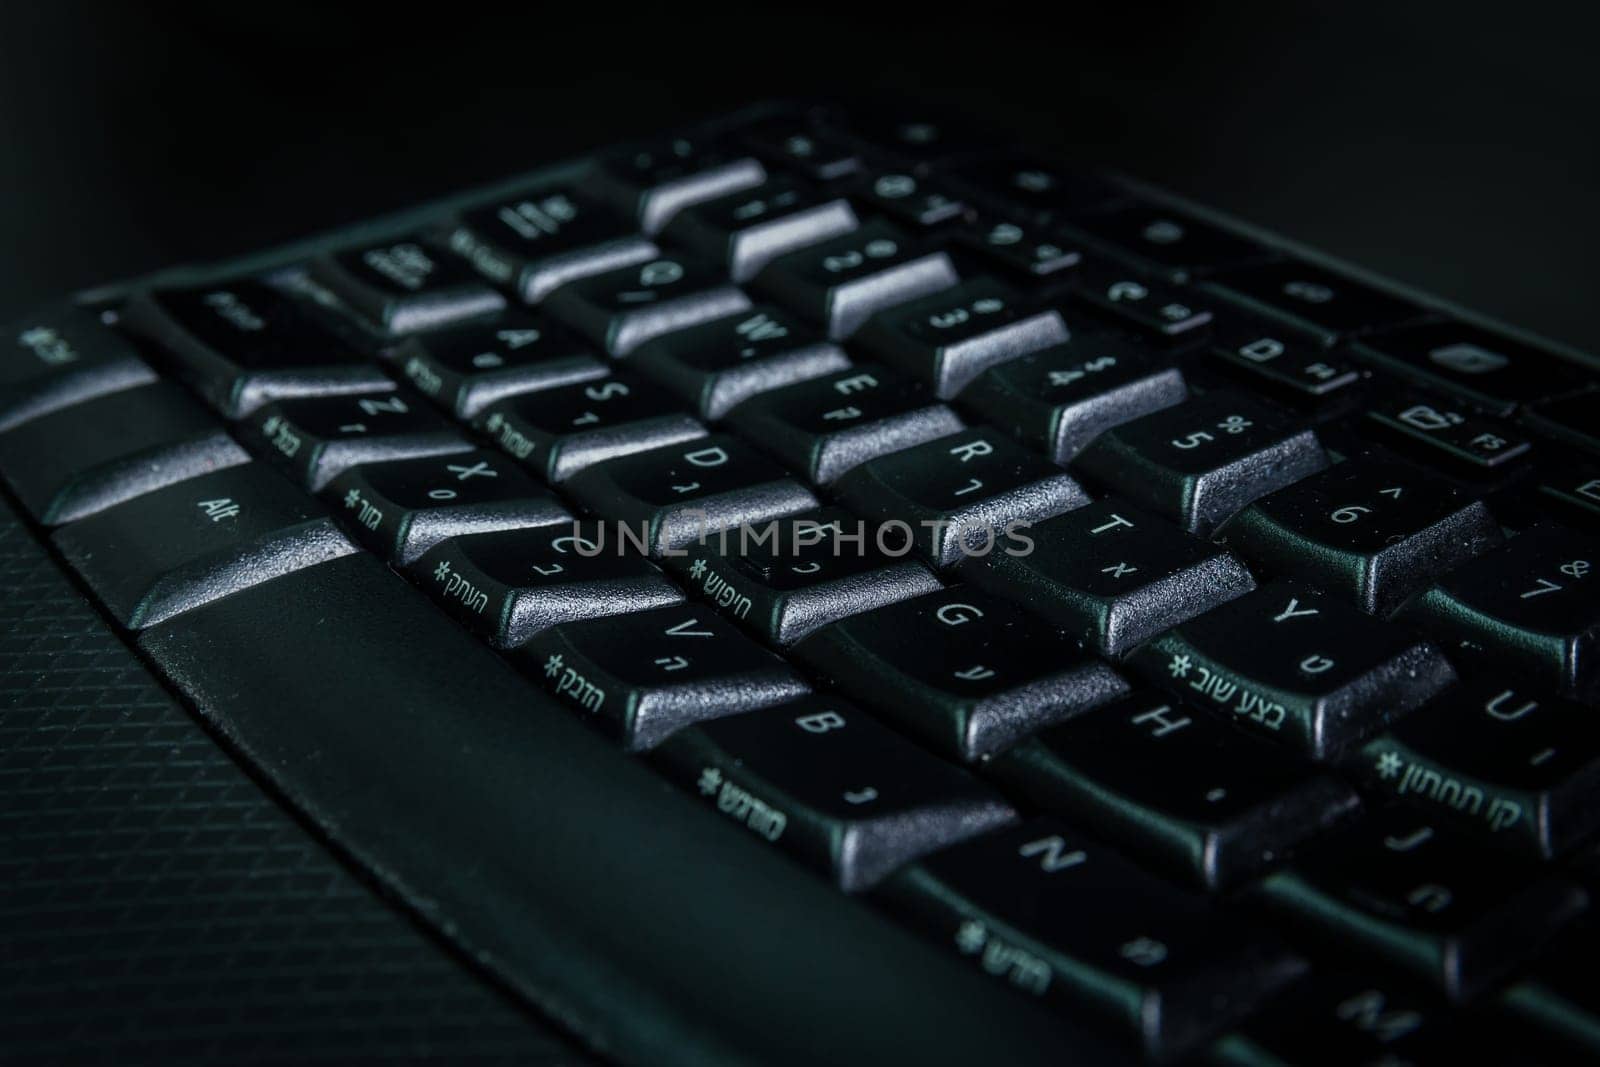 Keyboard with letters in Hebrew and English - Wireless keyboard - Close up - Dark atmosphere